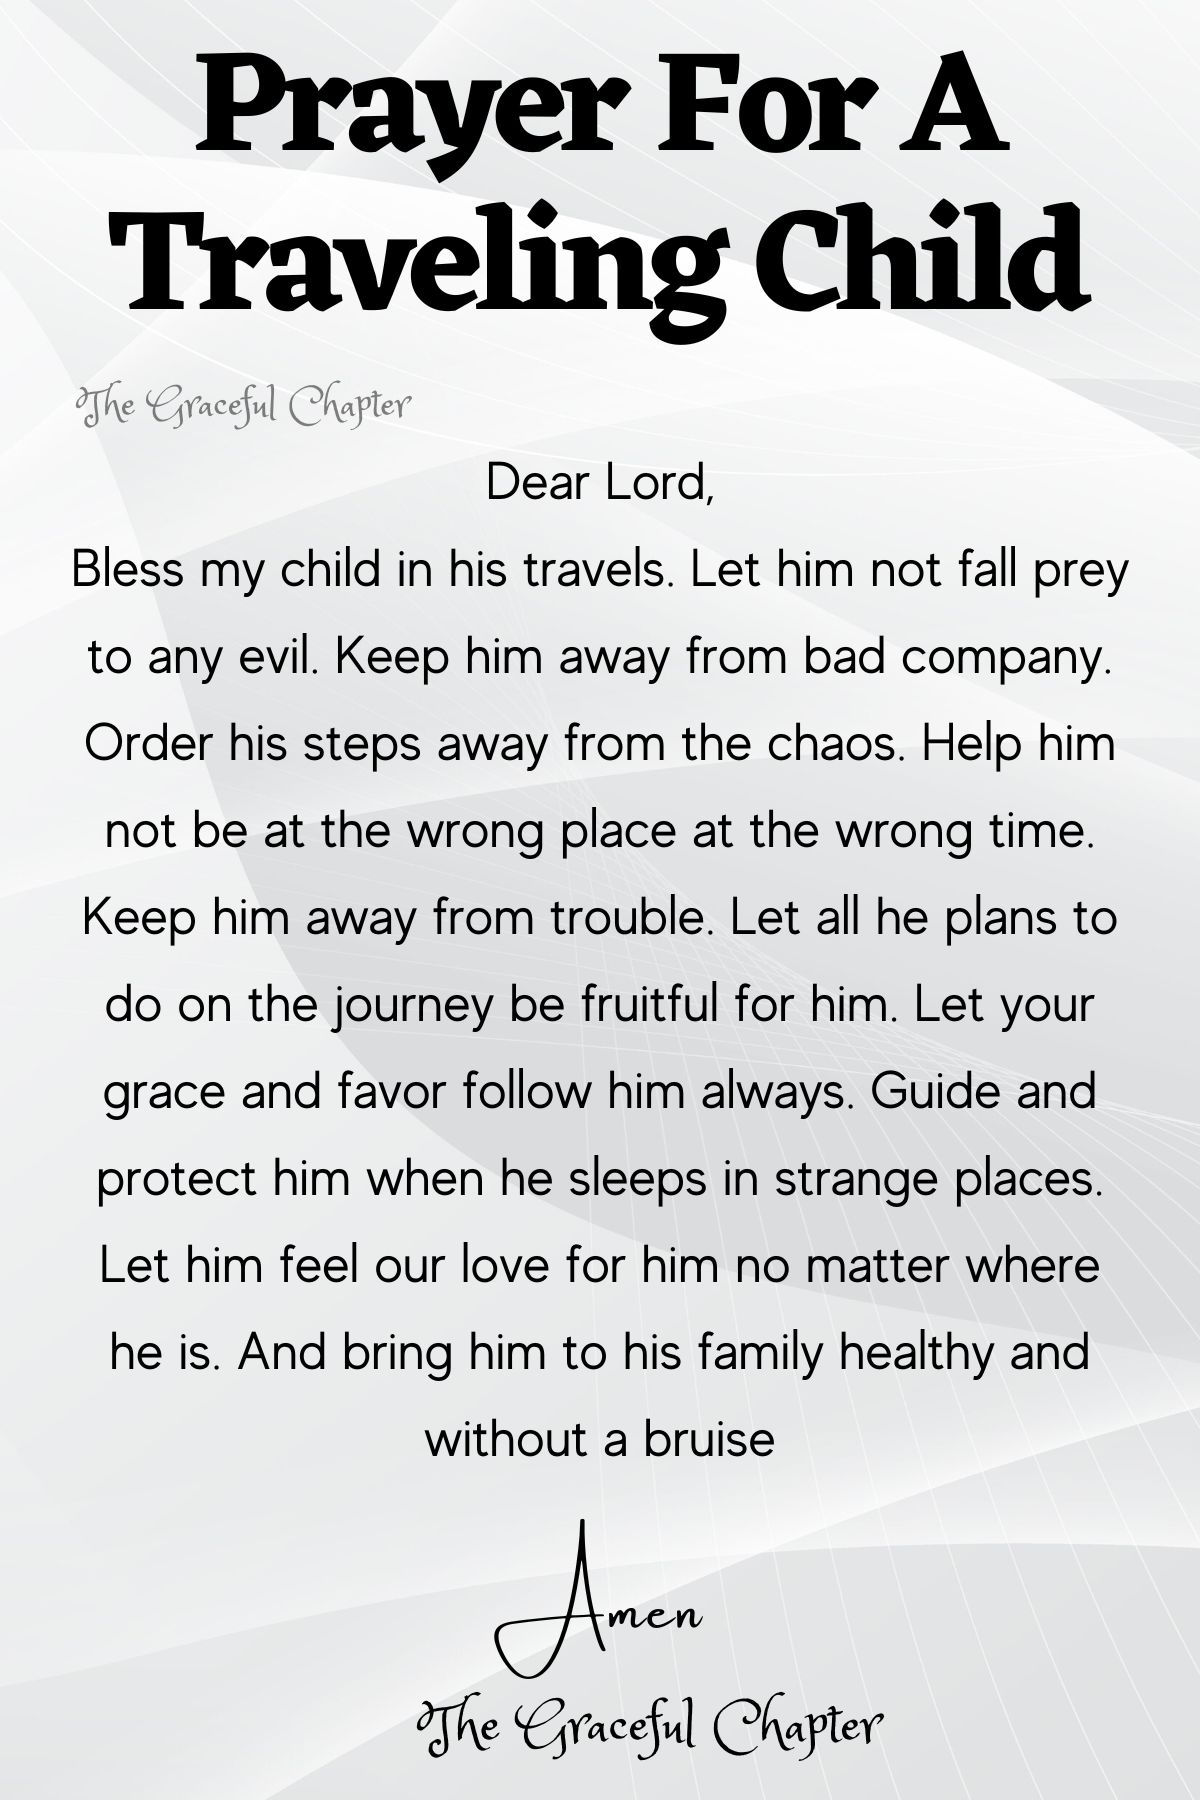 Prayer for a traveling child